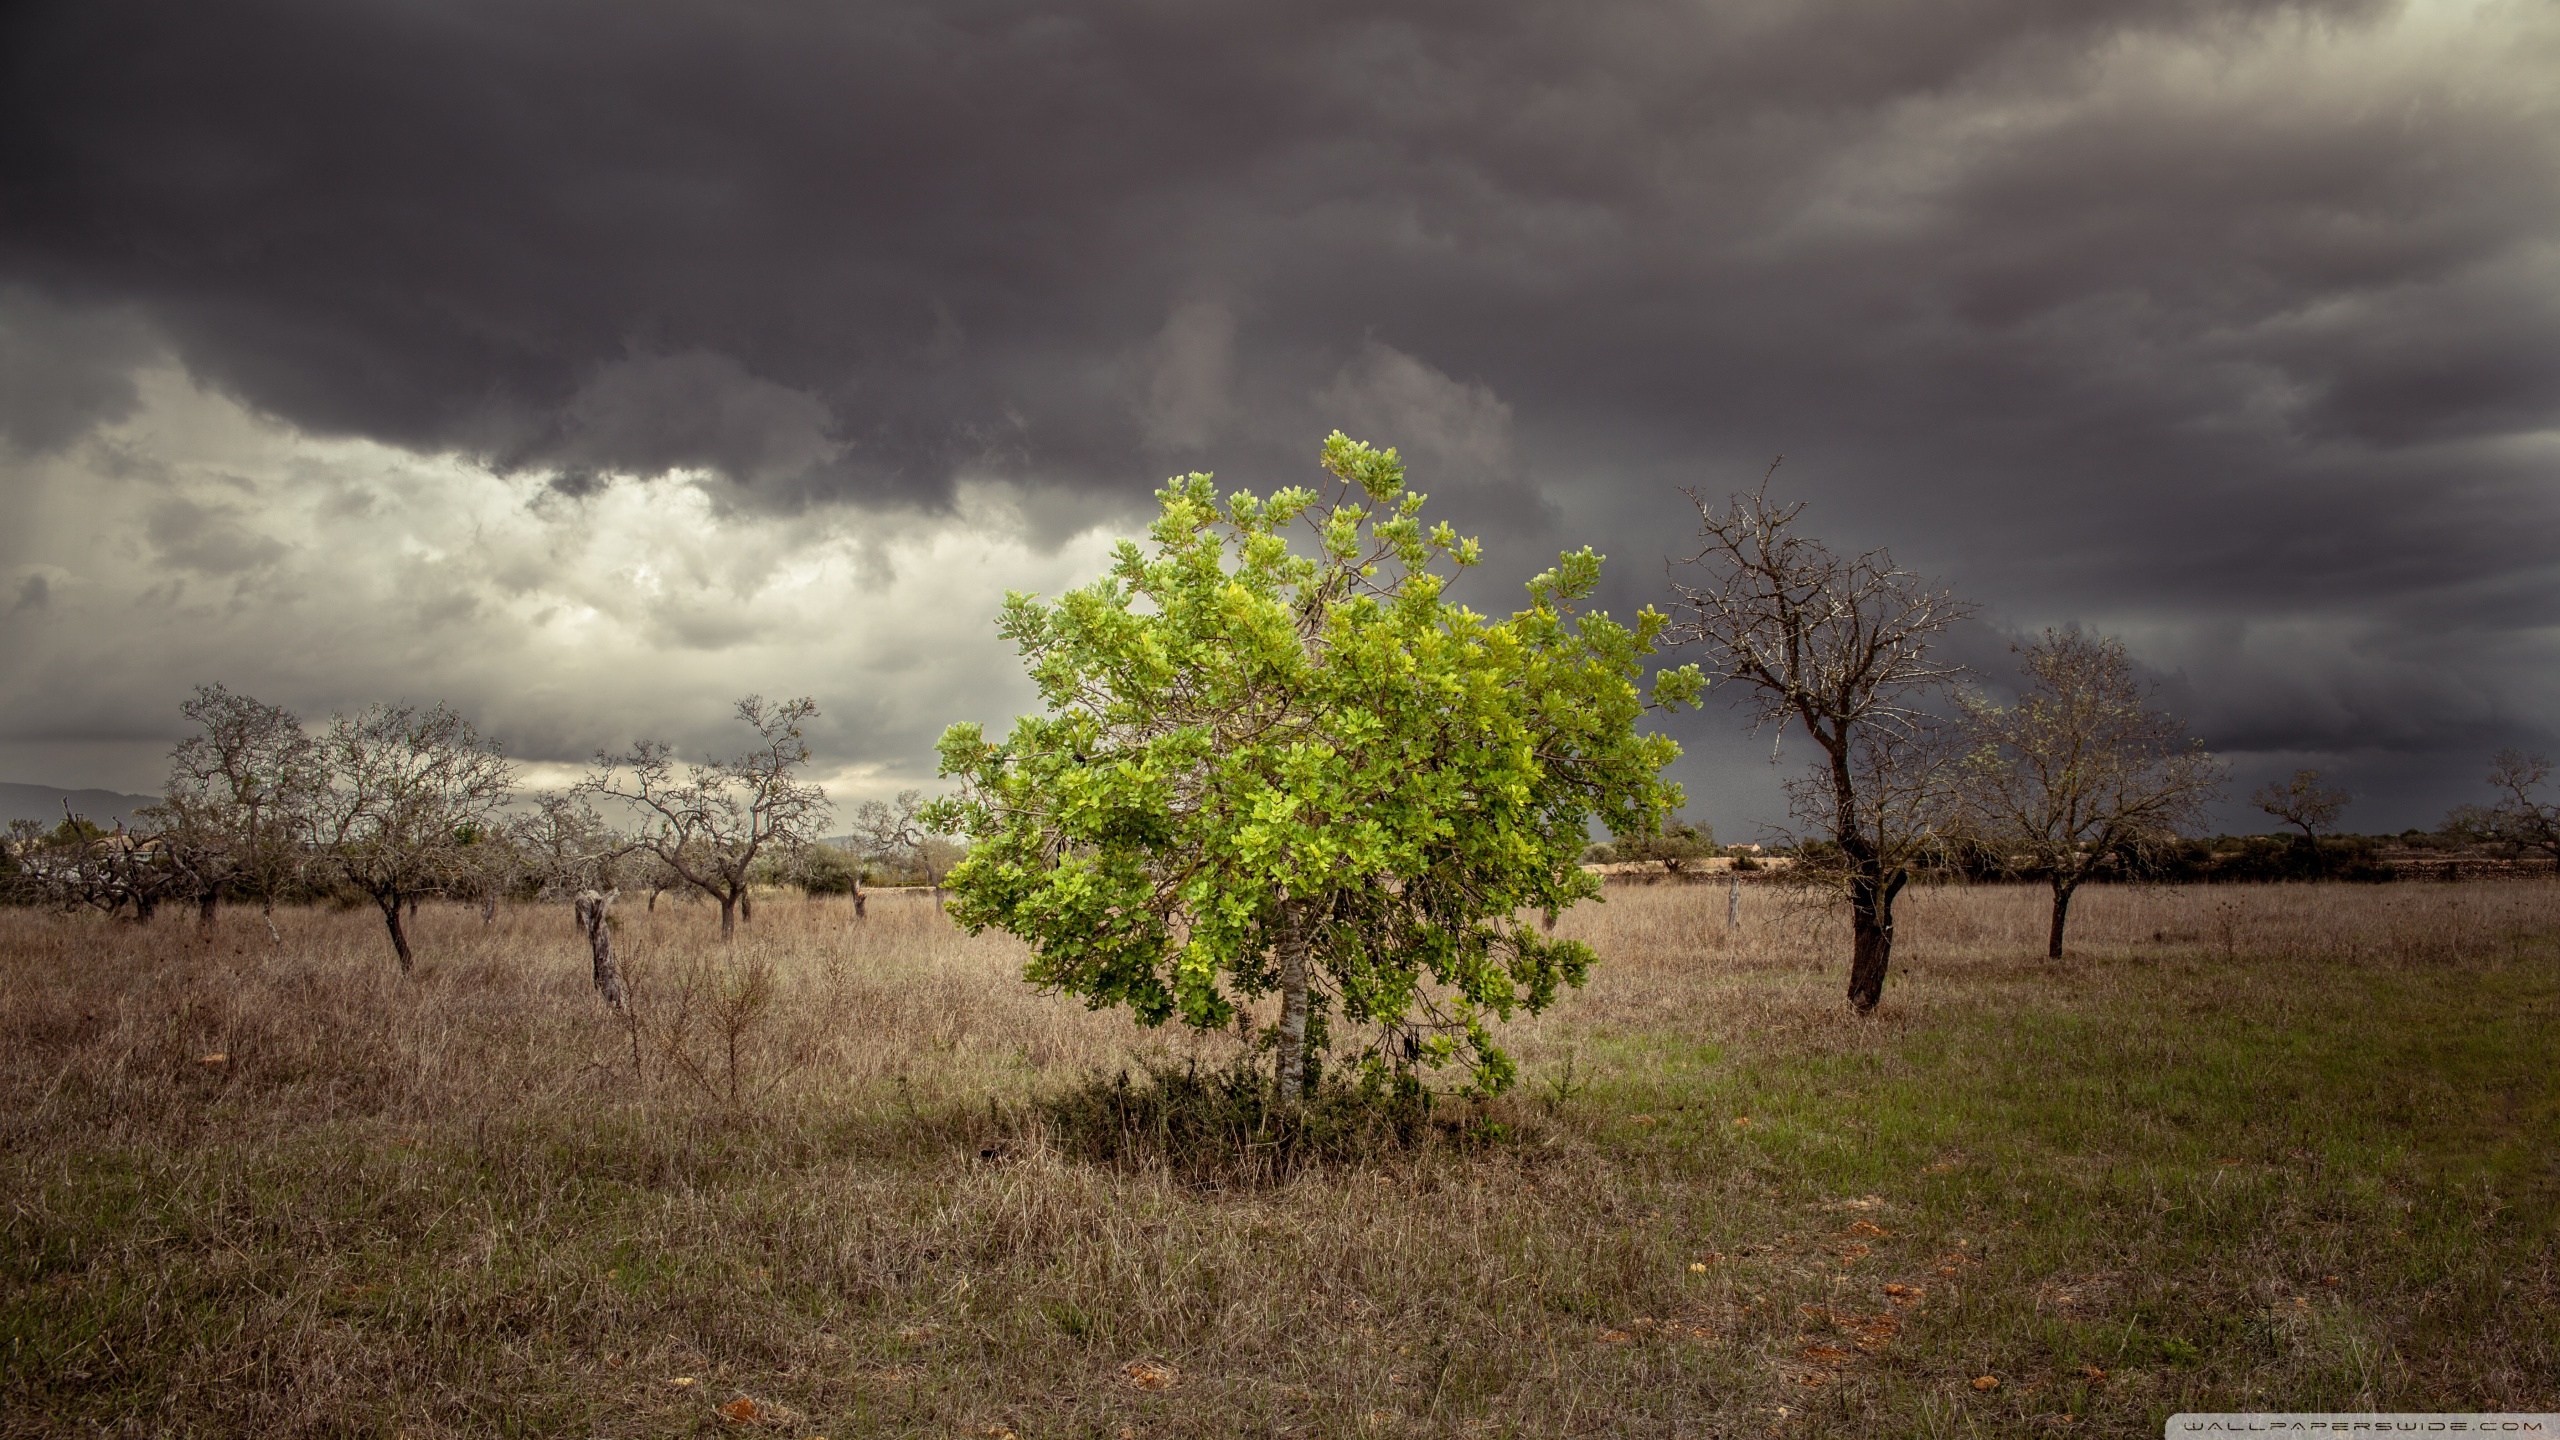 a_single_green_tree_surrounded_by_dead_trees-wallpaper-2560x1440.jpg